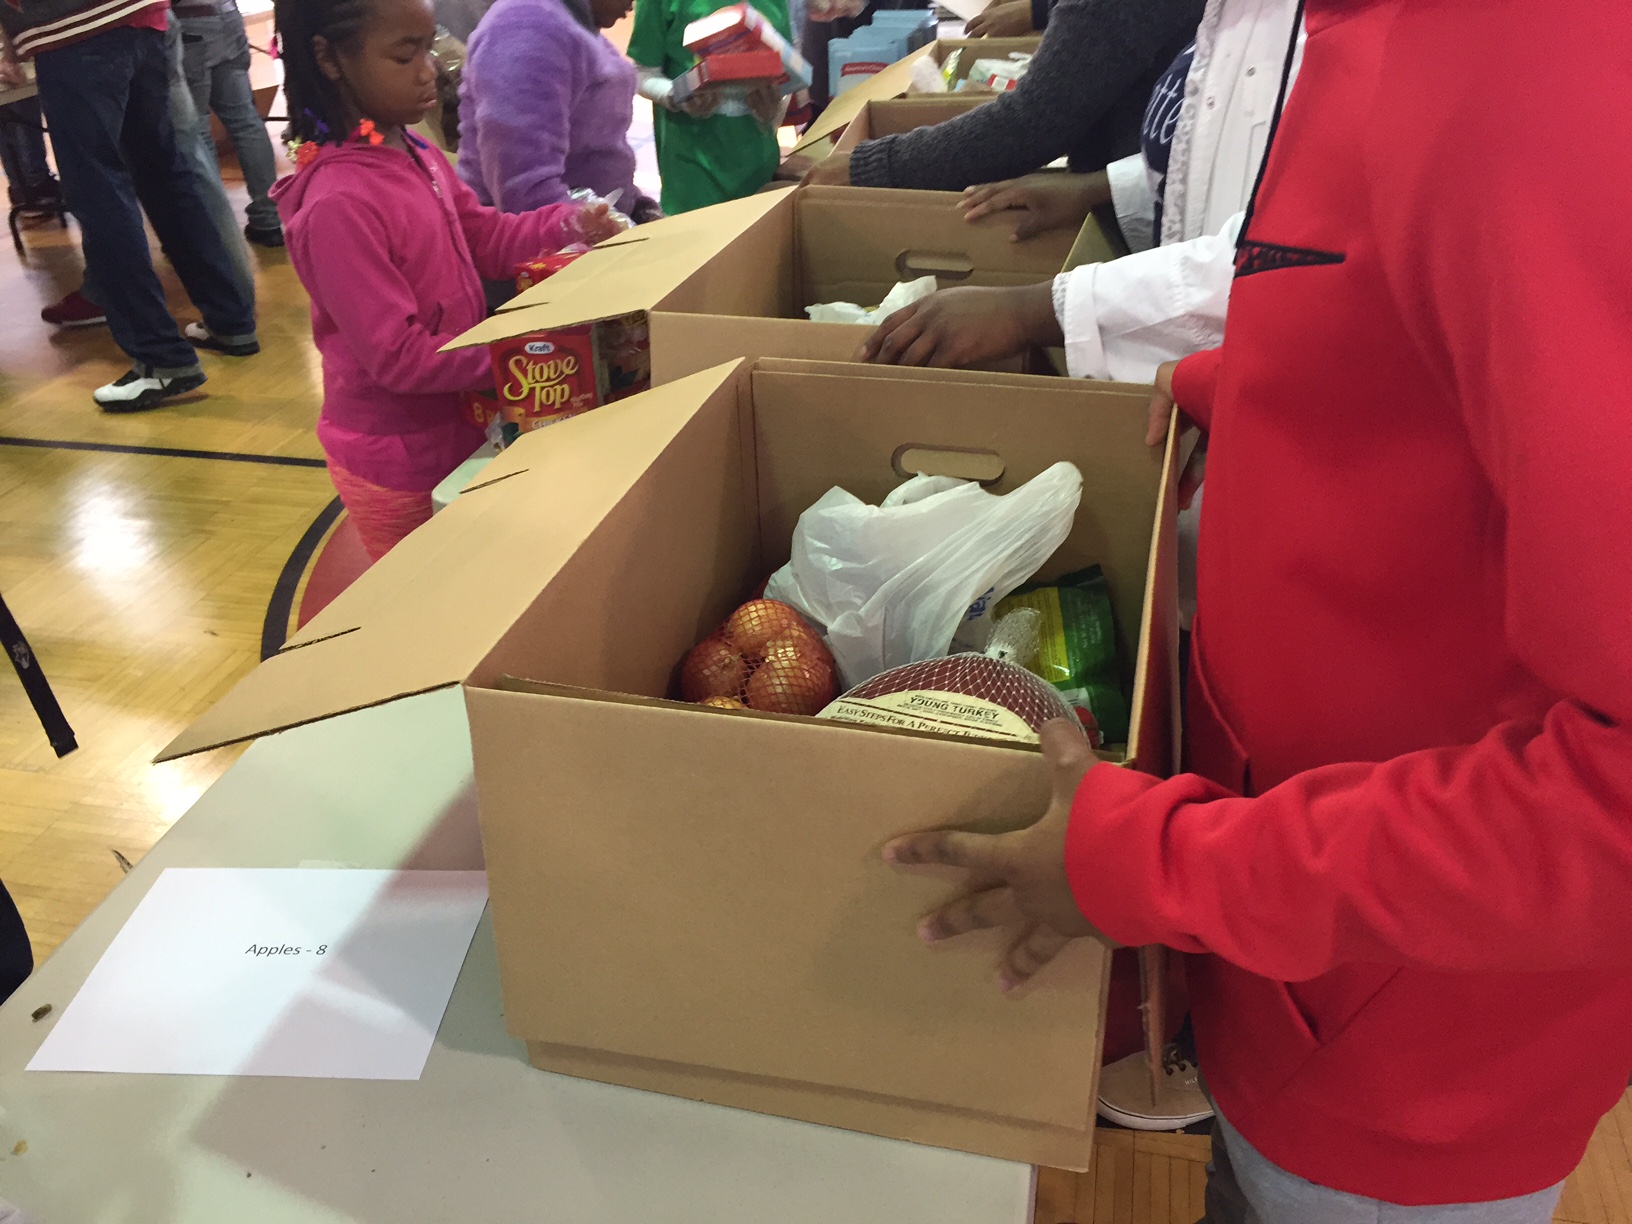 The food used in Project Giveback's boxes for those in need comes from the SHARE food network and features turkeys, whole chickens, sweet potatoes and other staples of a traditional Thanksgiving meal.  (WTOP/Dennis Foley)